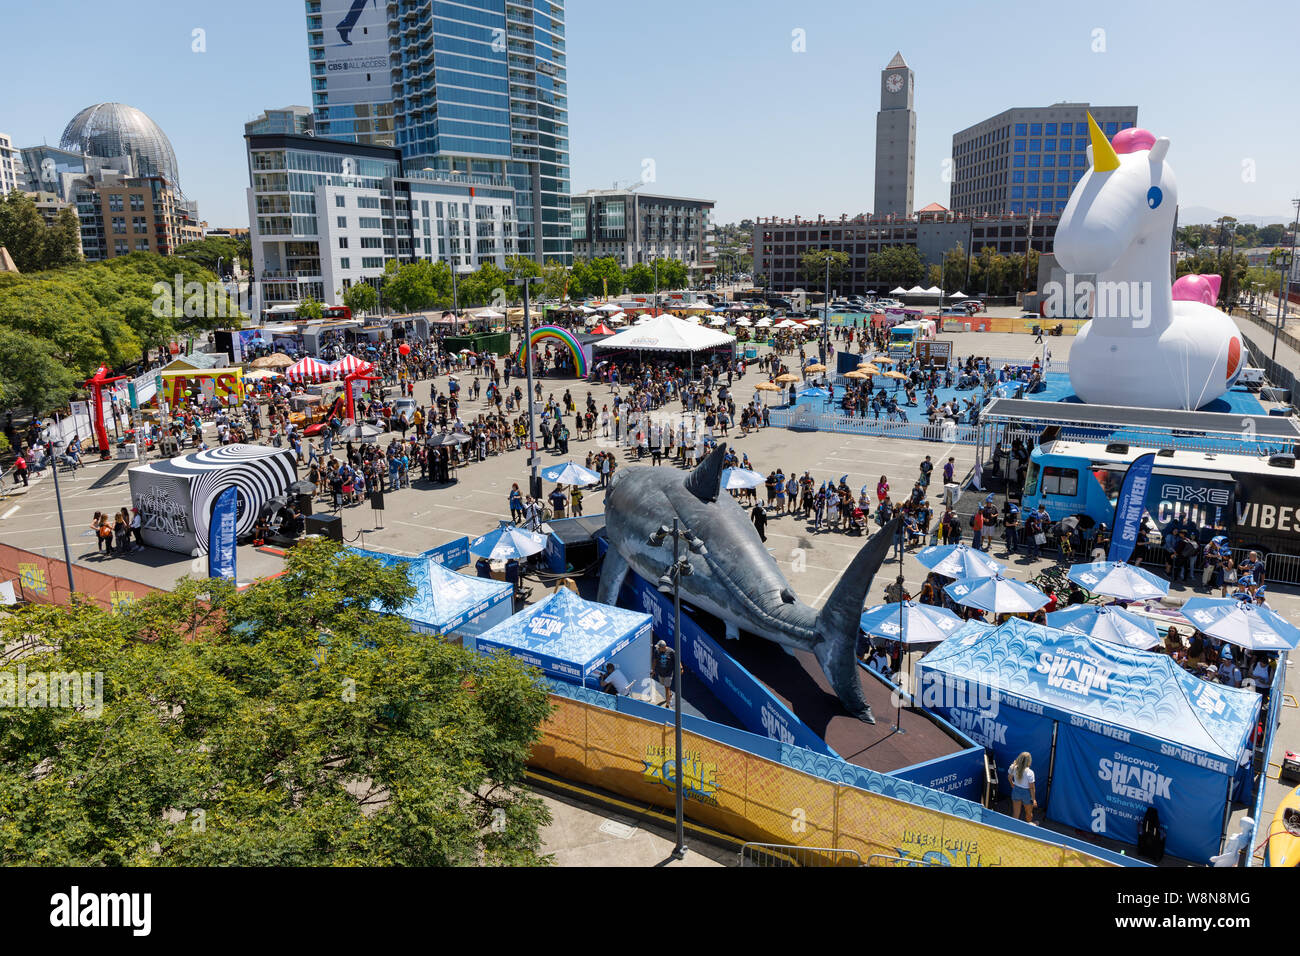 Overview of Interactive Zone at Petco Park during Comic Con 2019 Stock Photo